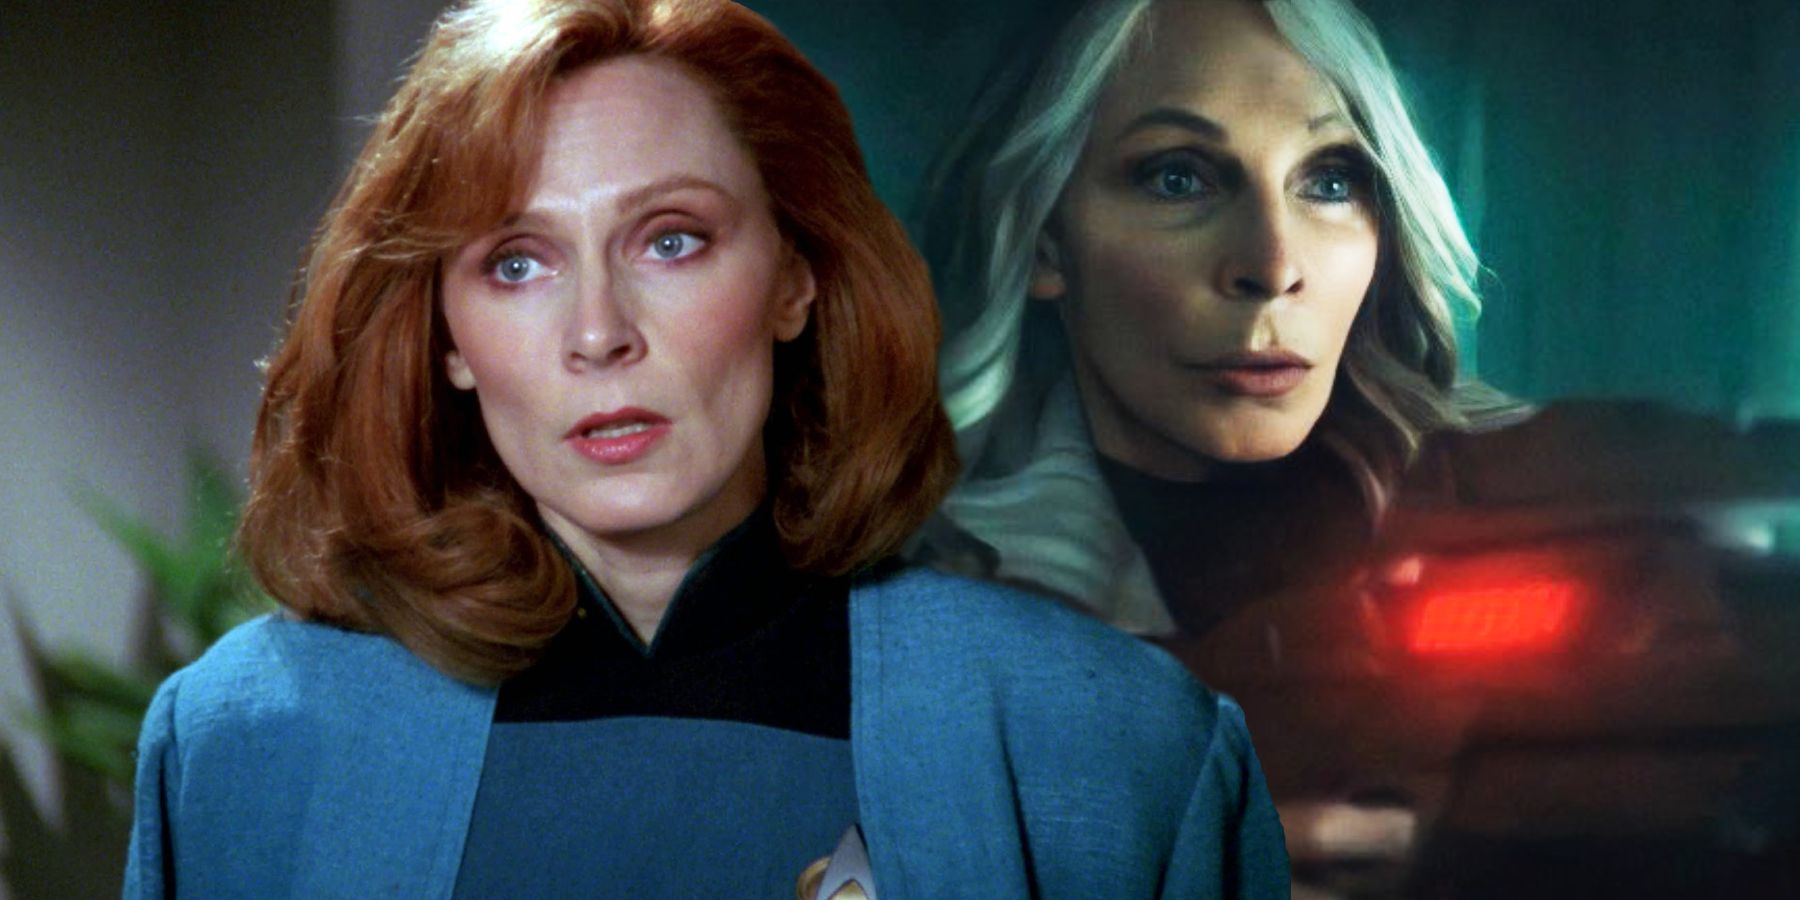 Gates McFadden as Beverly Crusher in TNG and Picard